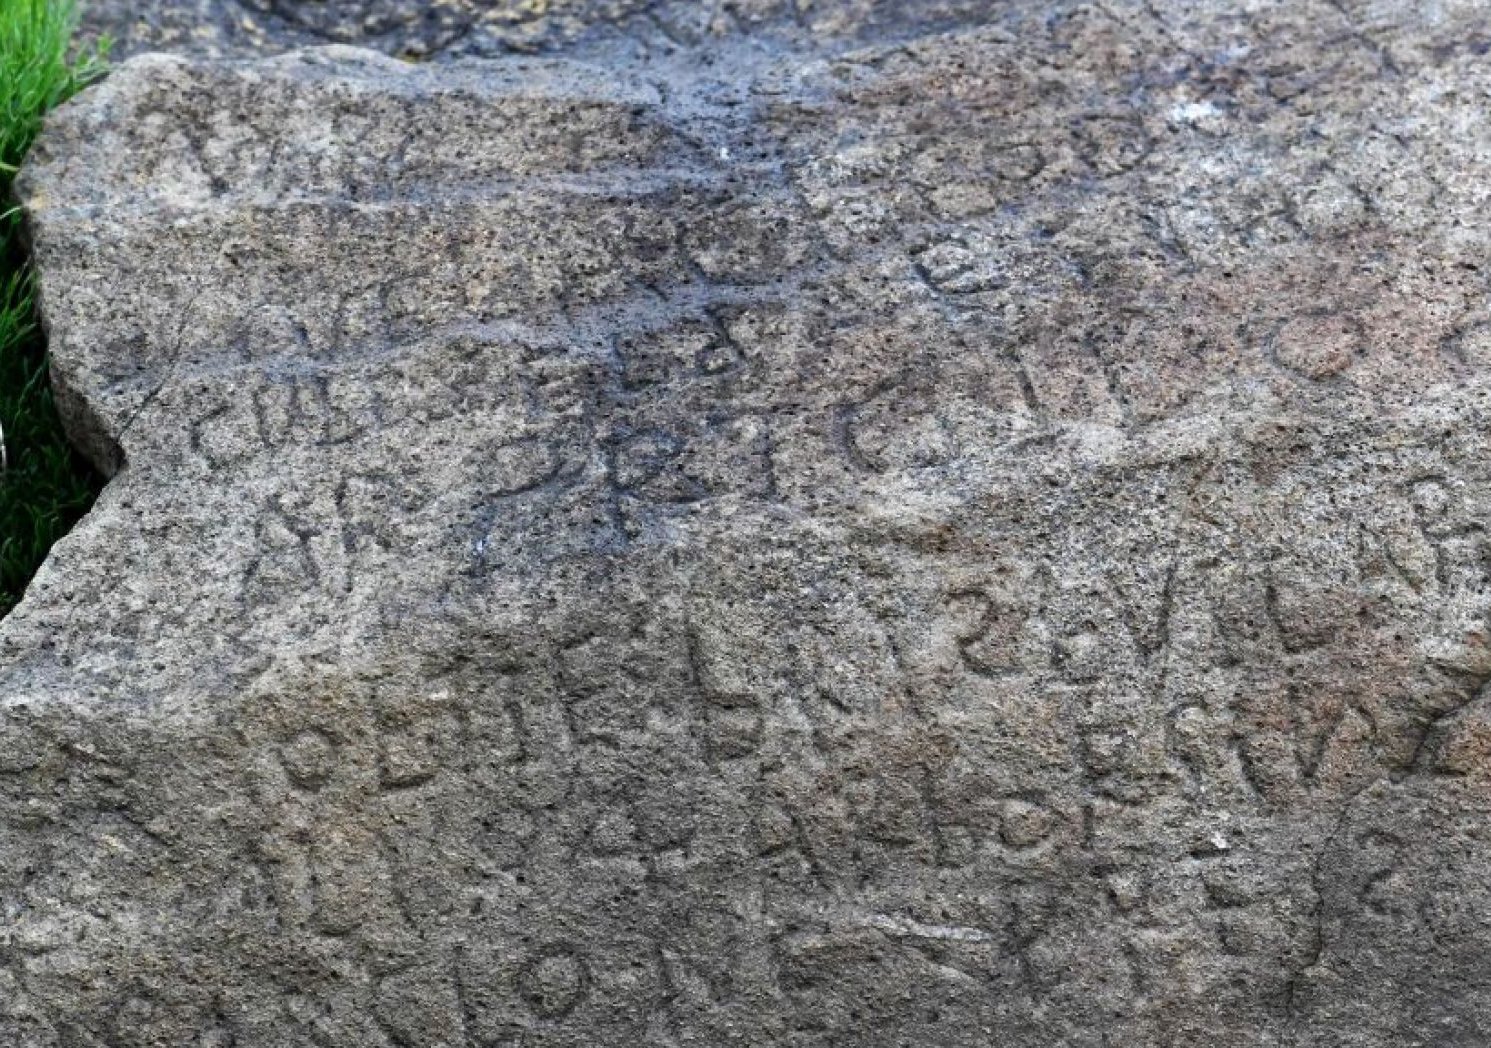 offers Rs. 1.5 lakh to any individual who can figure out 230-year old code engraved on a stone-French